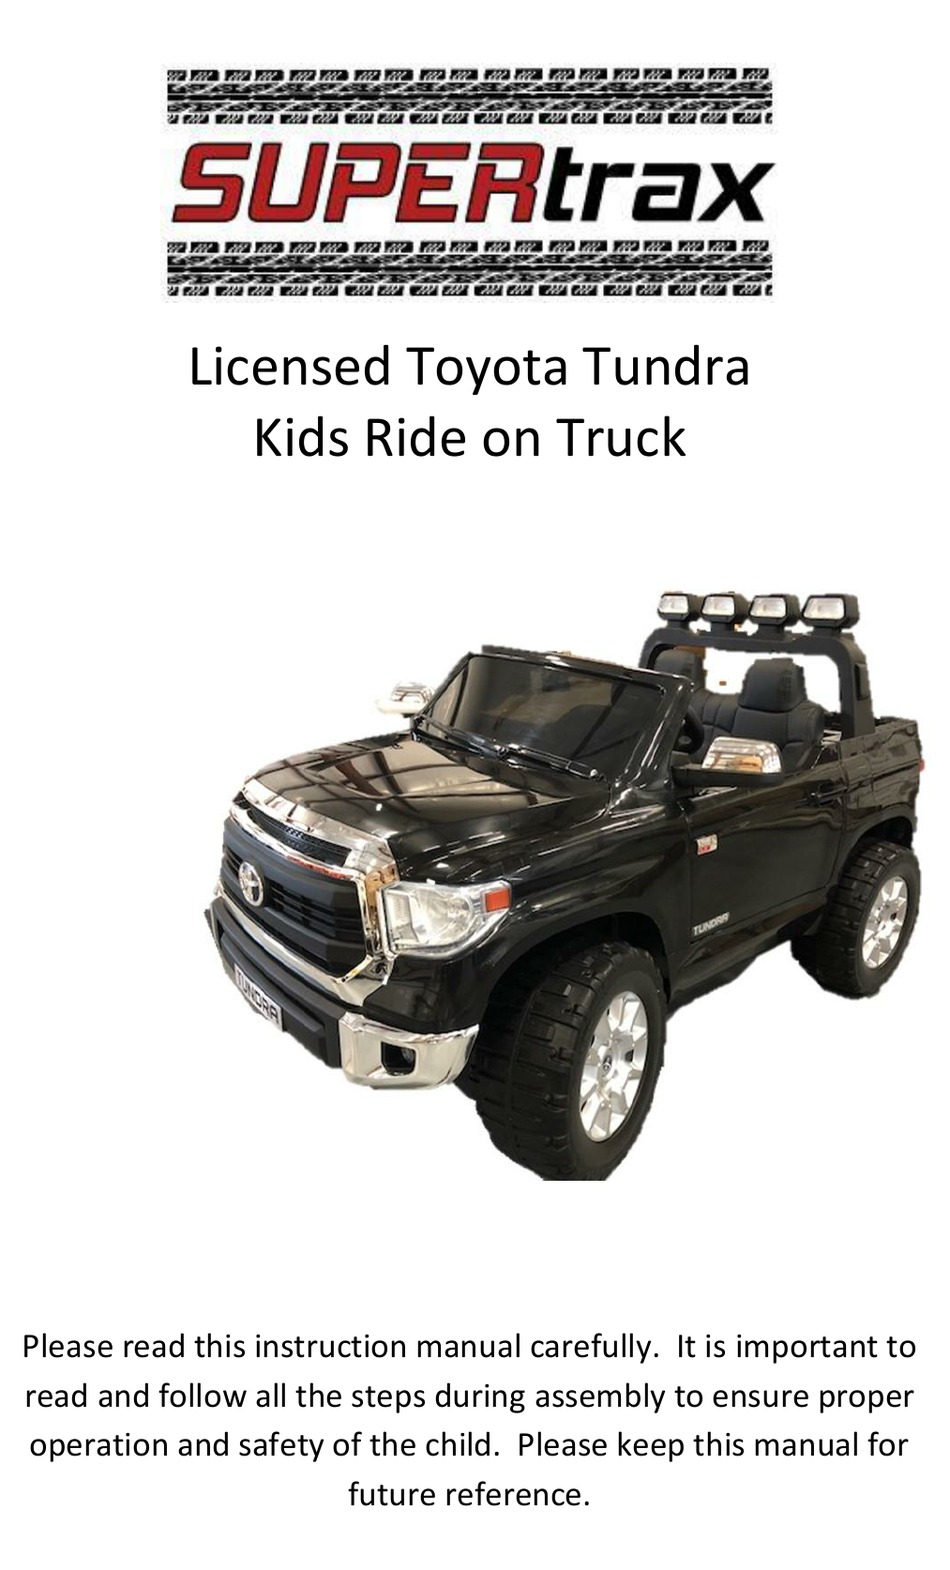 SUPERTRAX LICENSED TOYOTA TUNDRA KIDS RIDE ON TRUCK INSTRUCTION MANUAL